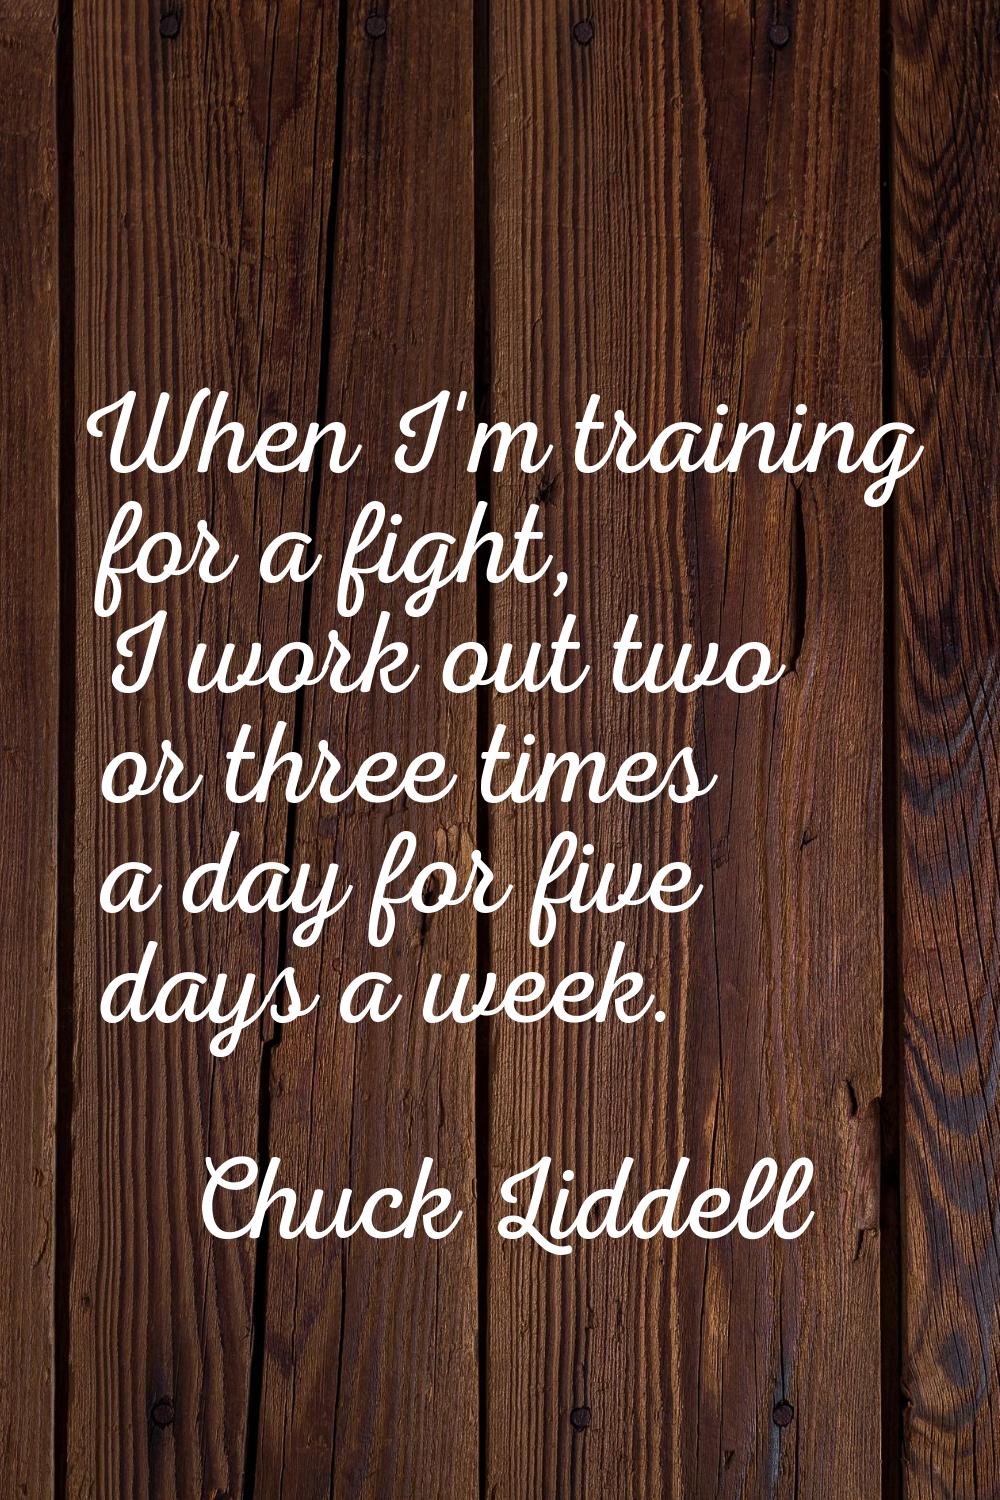 When I'm training for a fight, I work out two or three times a day for five days a week.